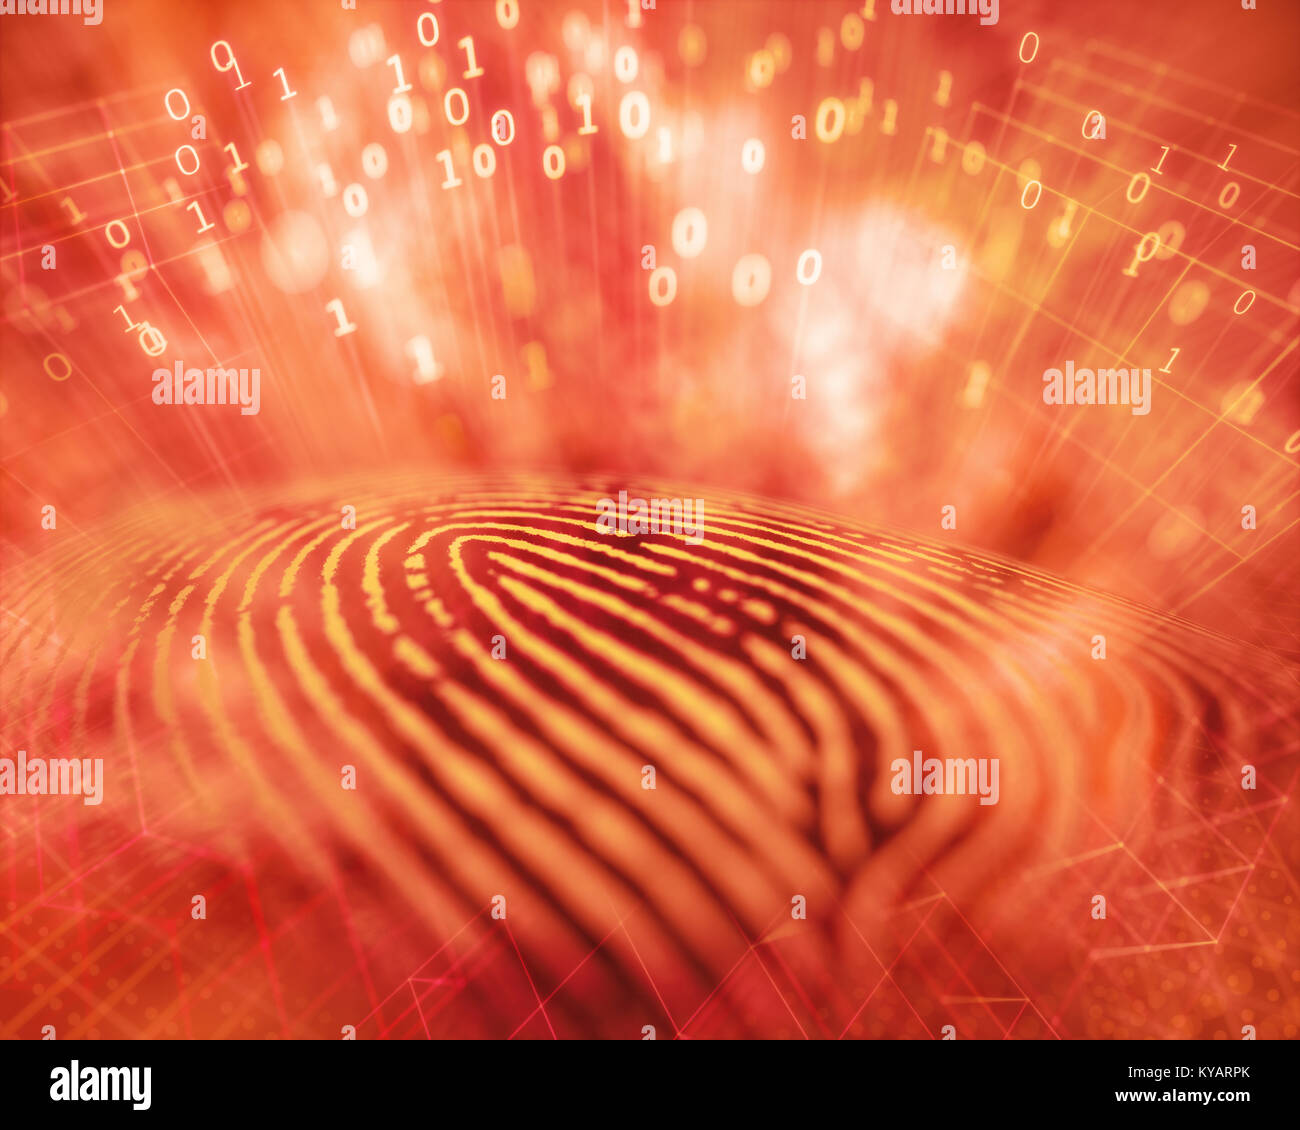 3D illustration. Fingerprint with explosion of binary codes, unauthorized access by hacker. Stock Photo